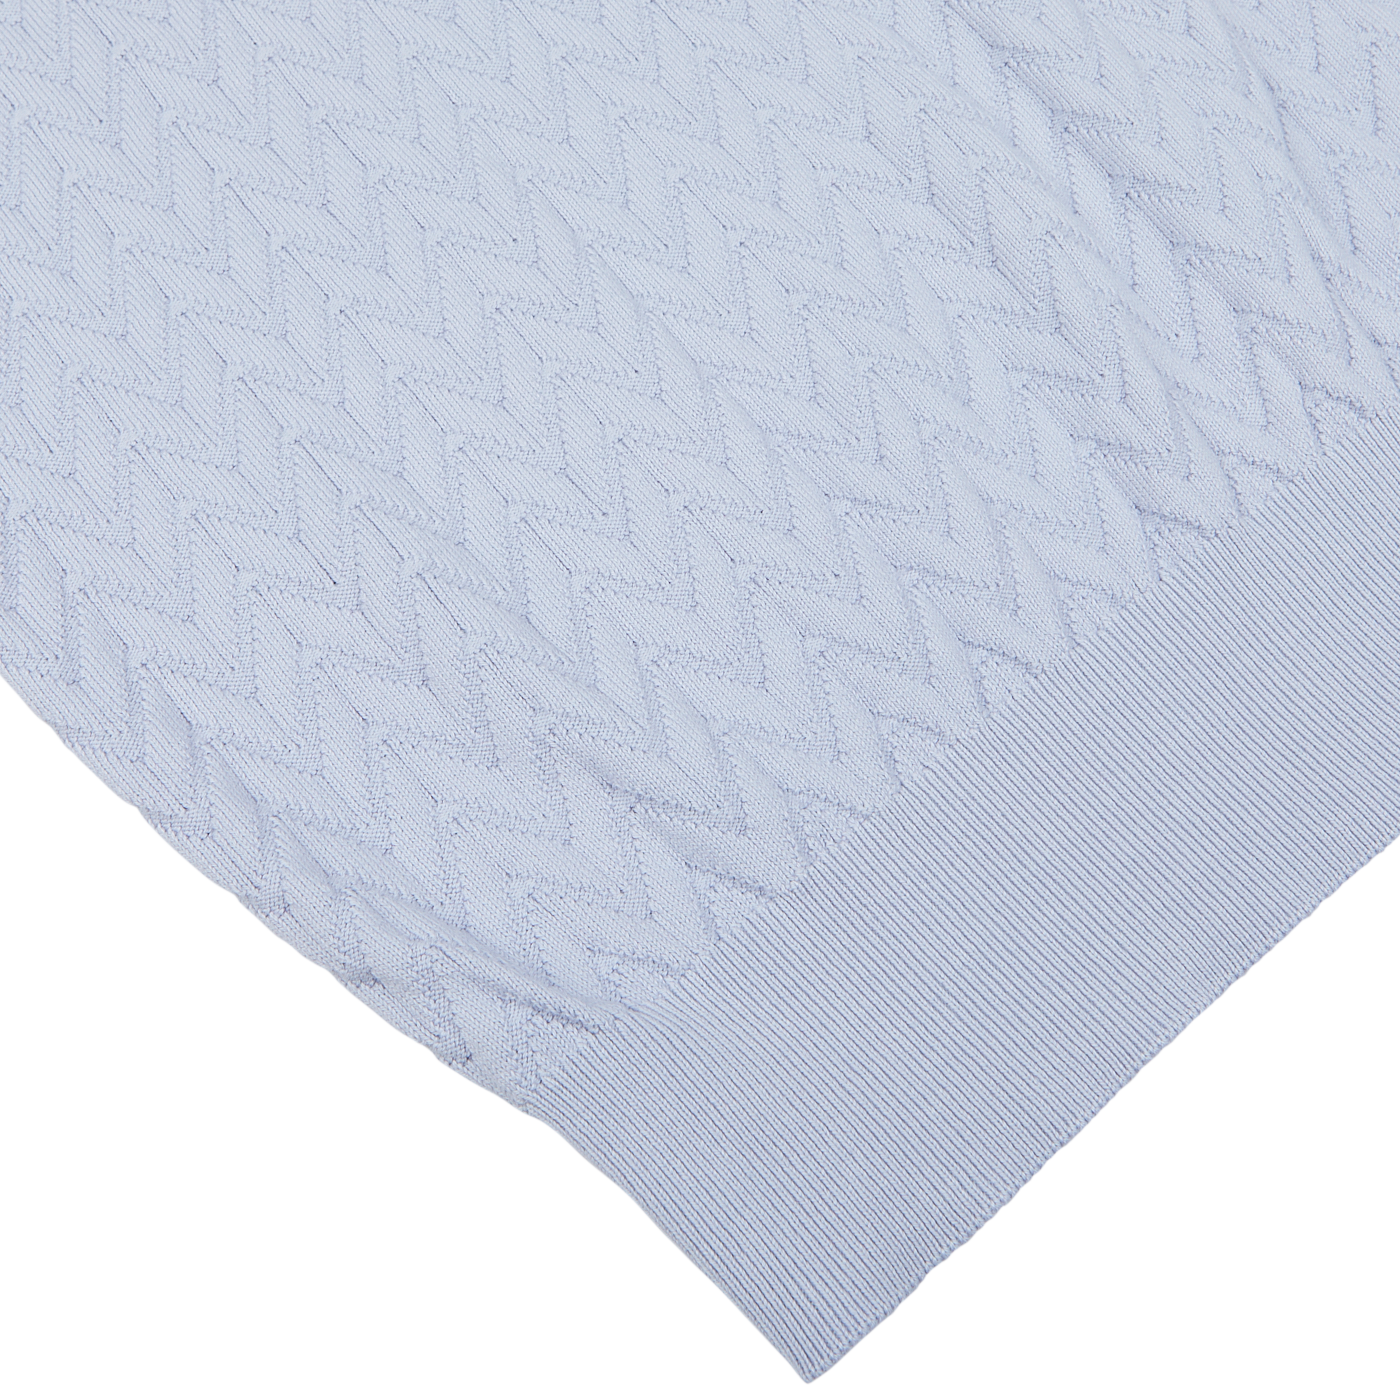 Light blue Altea pure cotton textured fabric overlaying a smooth white surface.